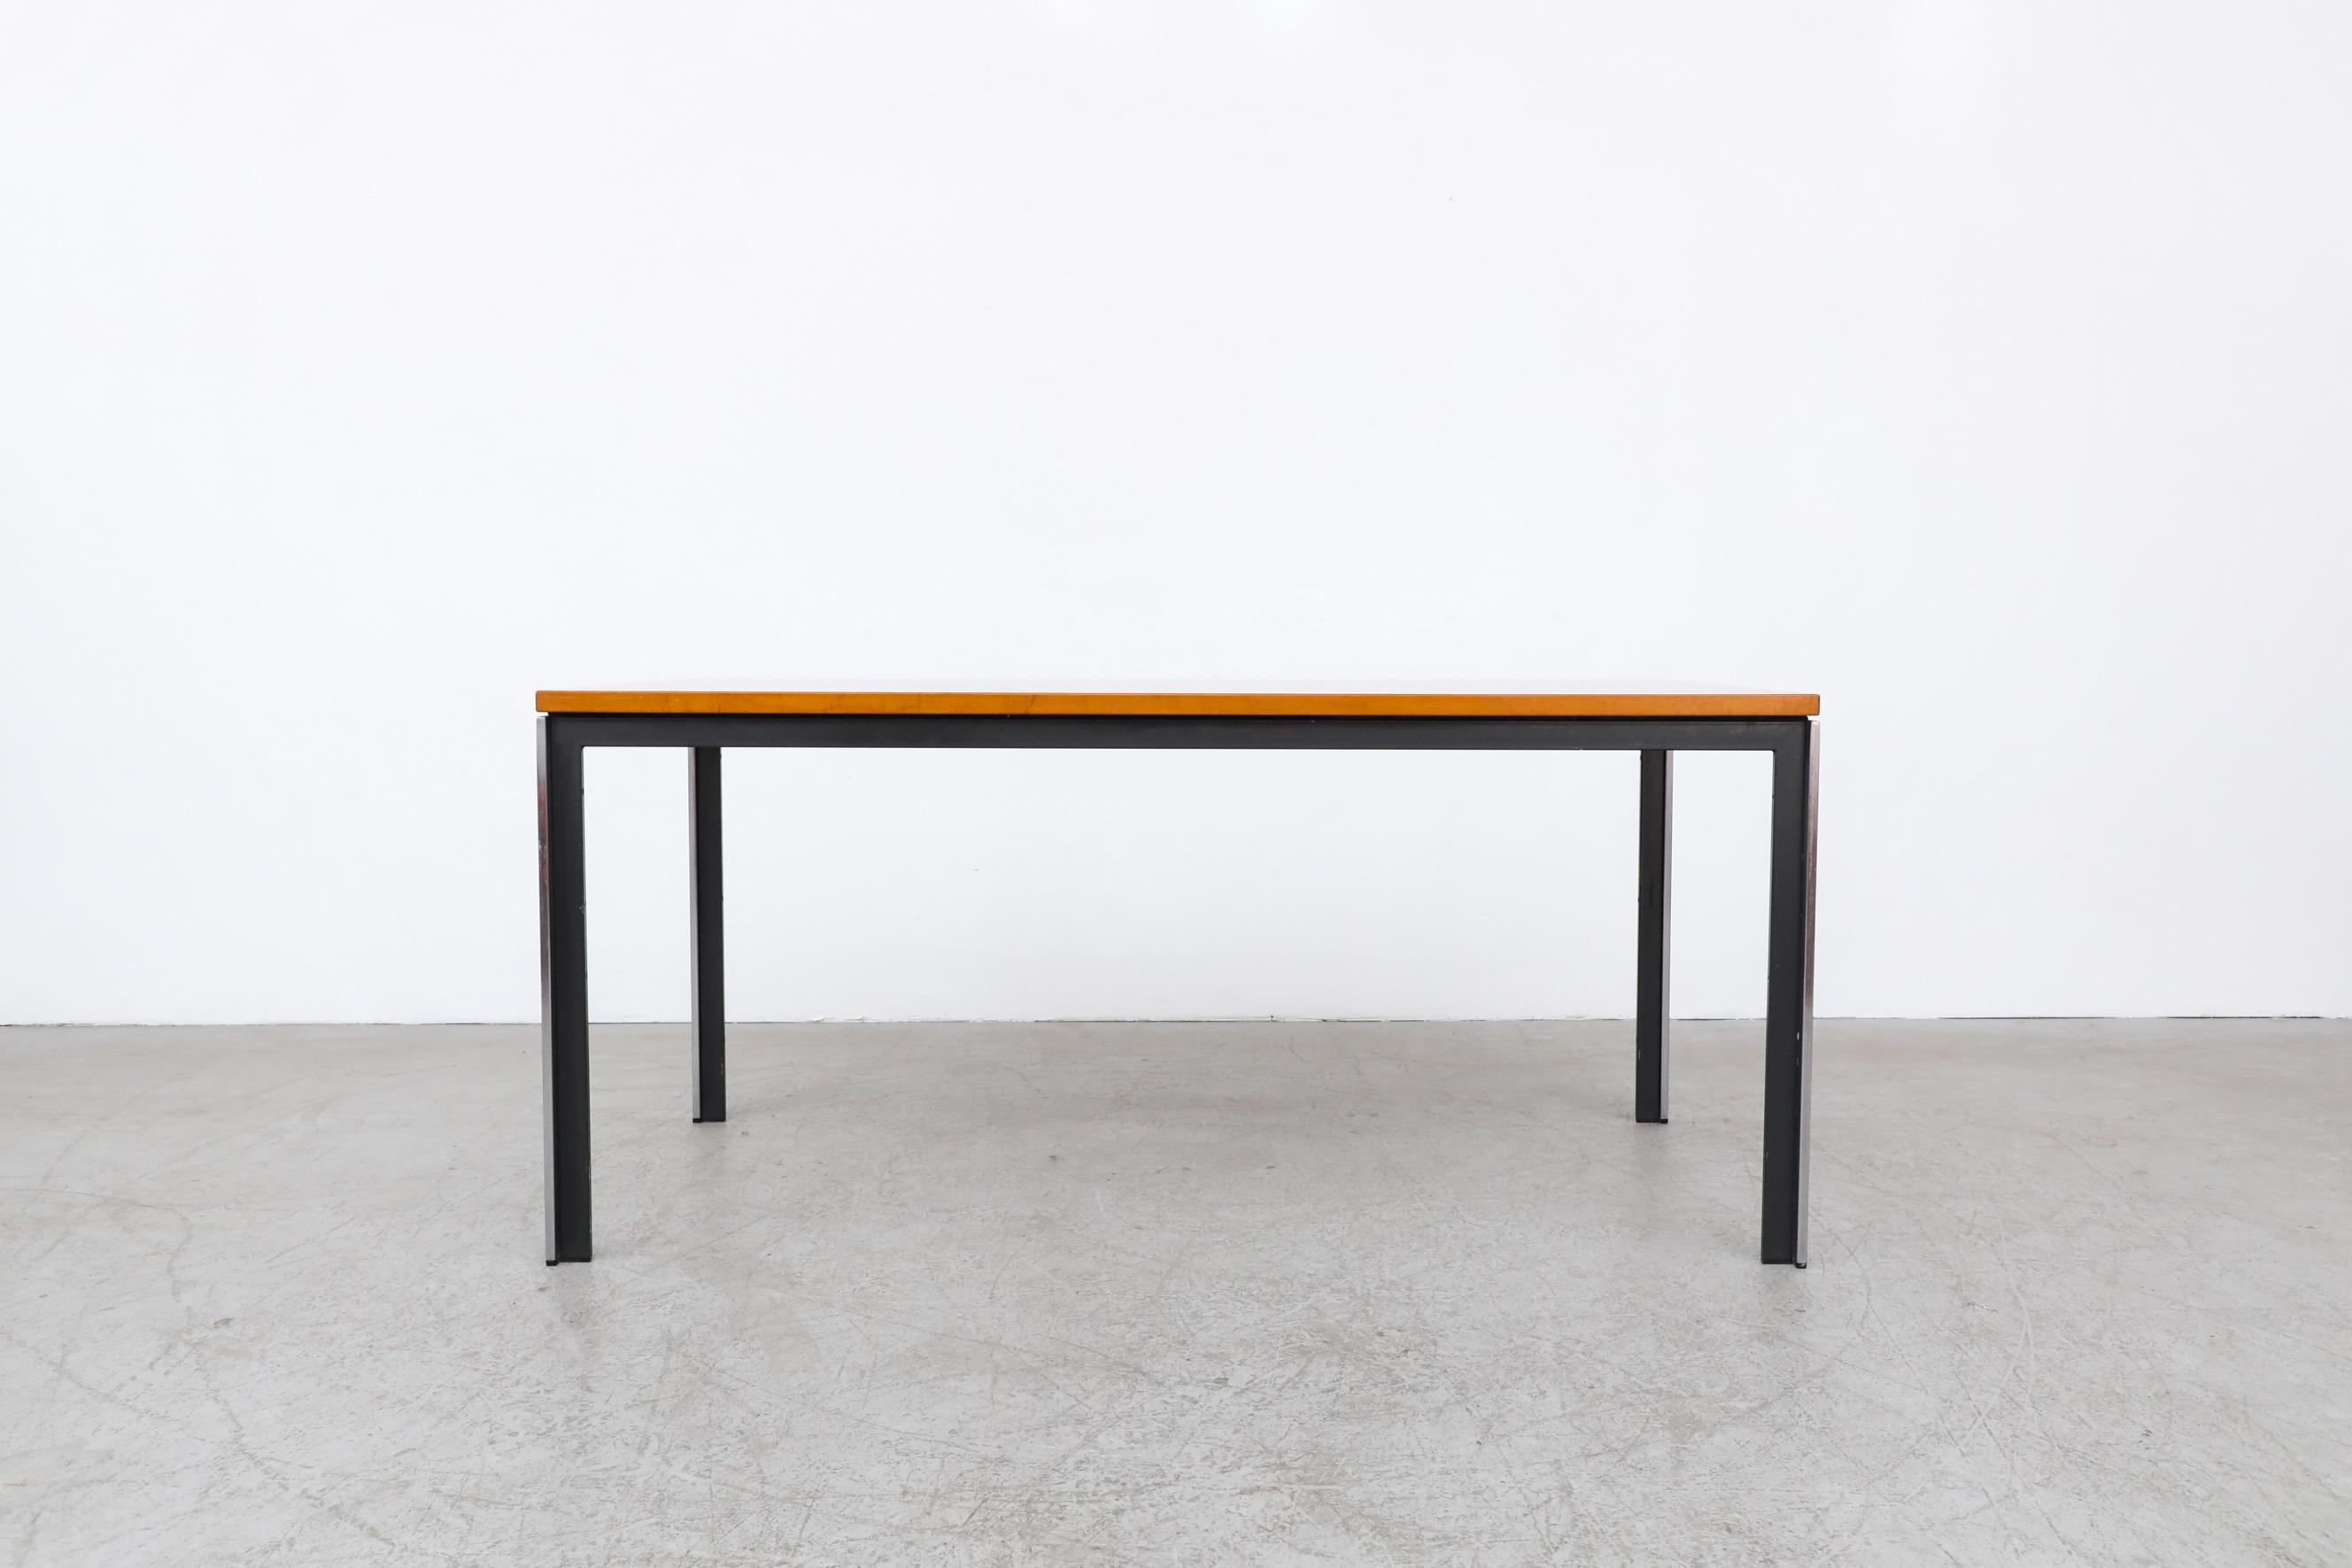 Architectural polak dining table or desk with original teak top, black enameled metal and polished steel Industrial frame. Innovative configuration of metal and polished steel. In original condition with visible wear and scratching consistent with